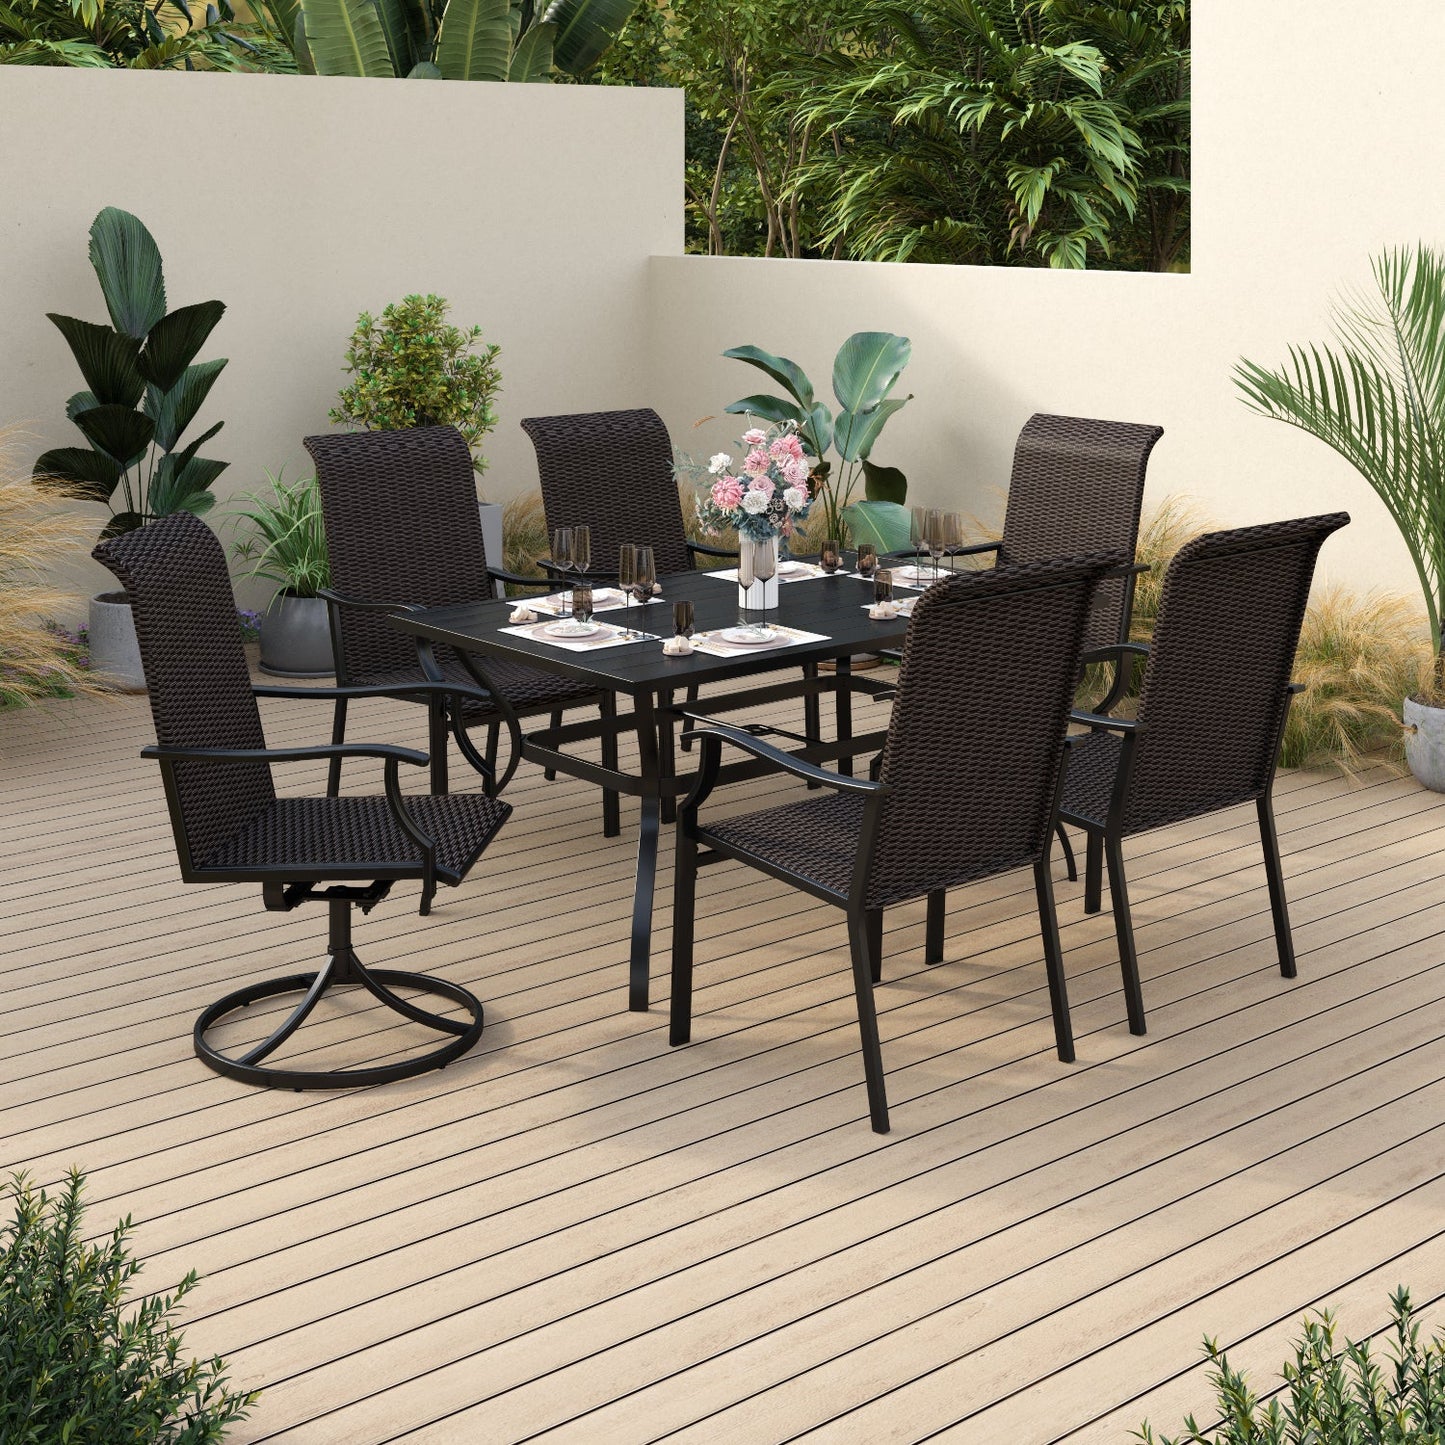 Sophia & William 7 Pieces Outdoor Patio Dining Set PE Rattan Patio Dining Chairs and Metal Dining Table